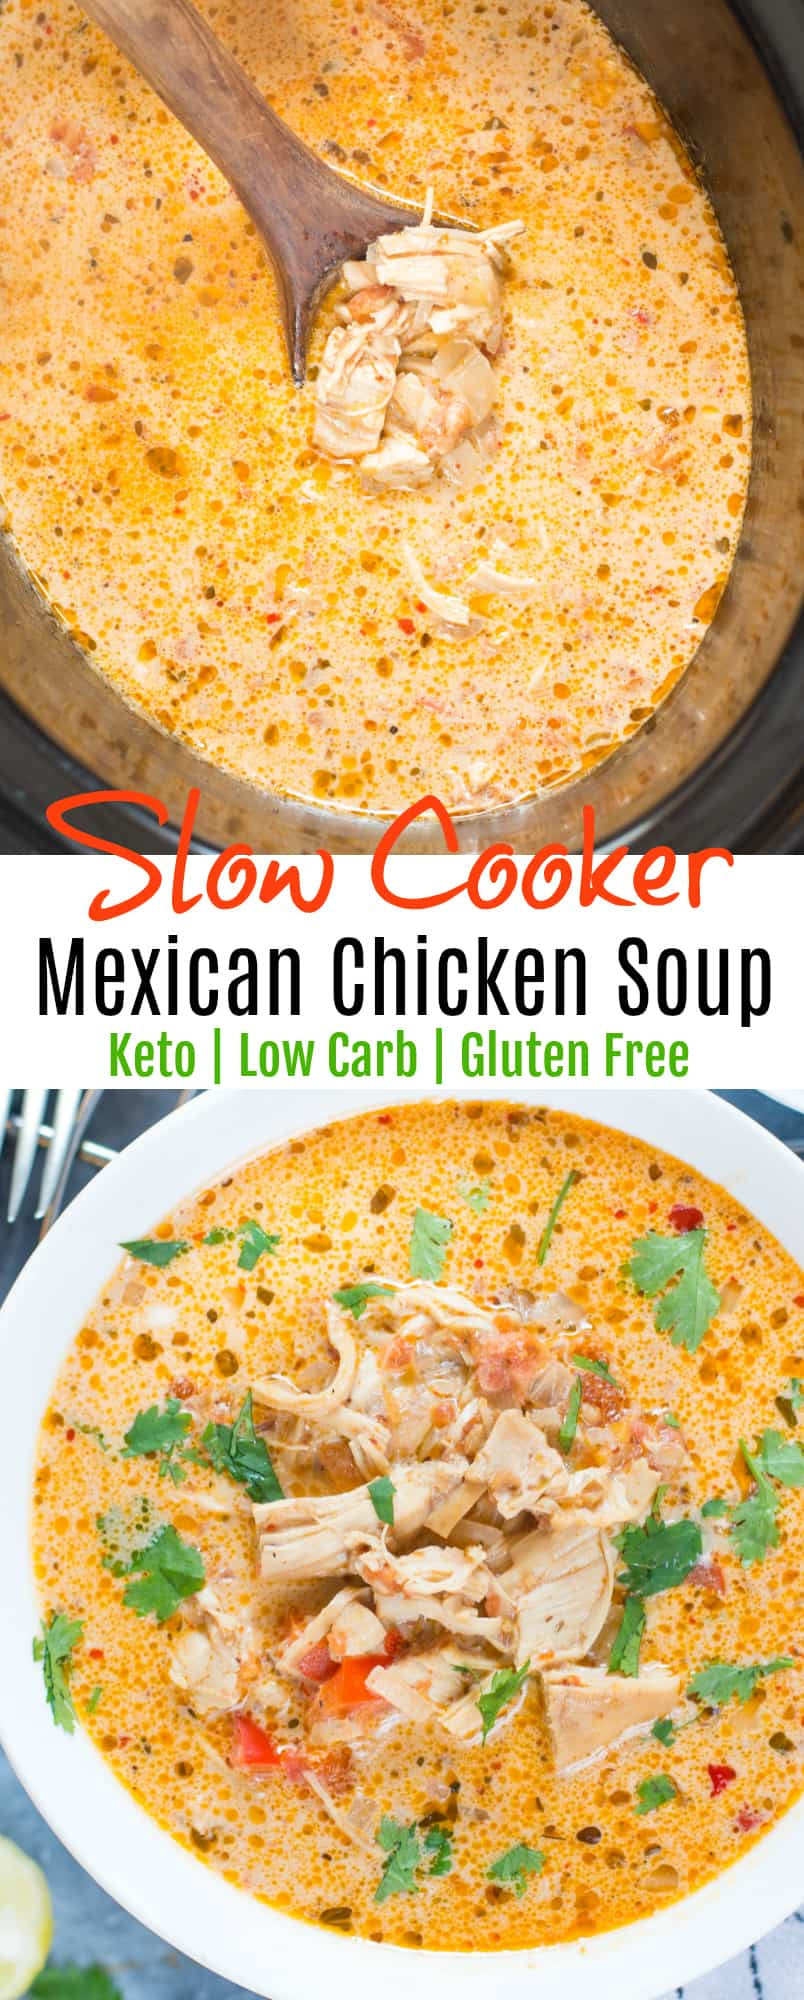 Slow Cooker Keto Soup Recipes
 SLOW COOKER MEXICAN CHICKEN SOUP The flavours of kitchen